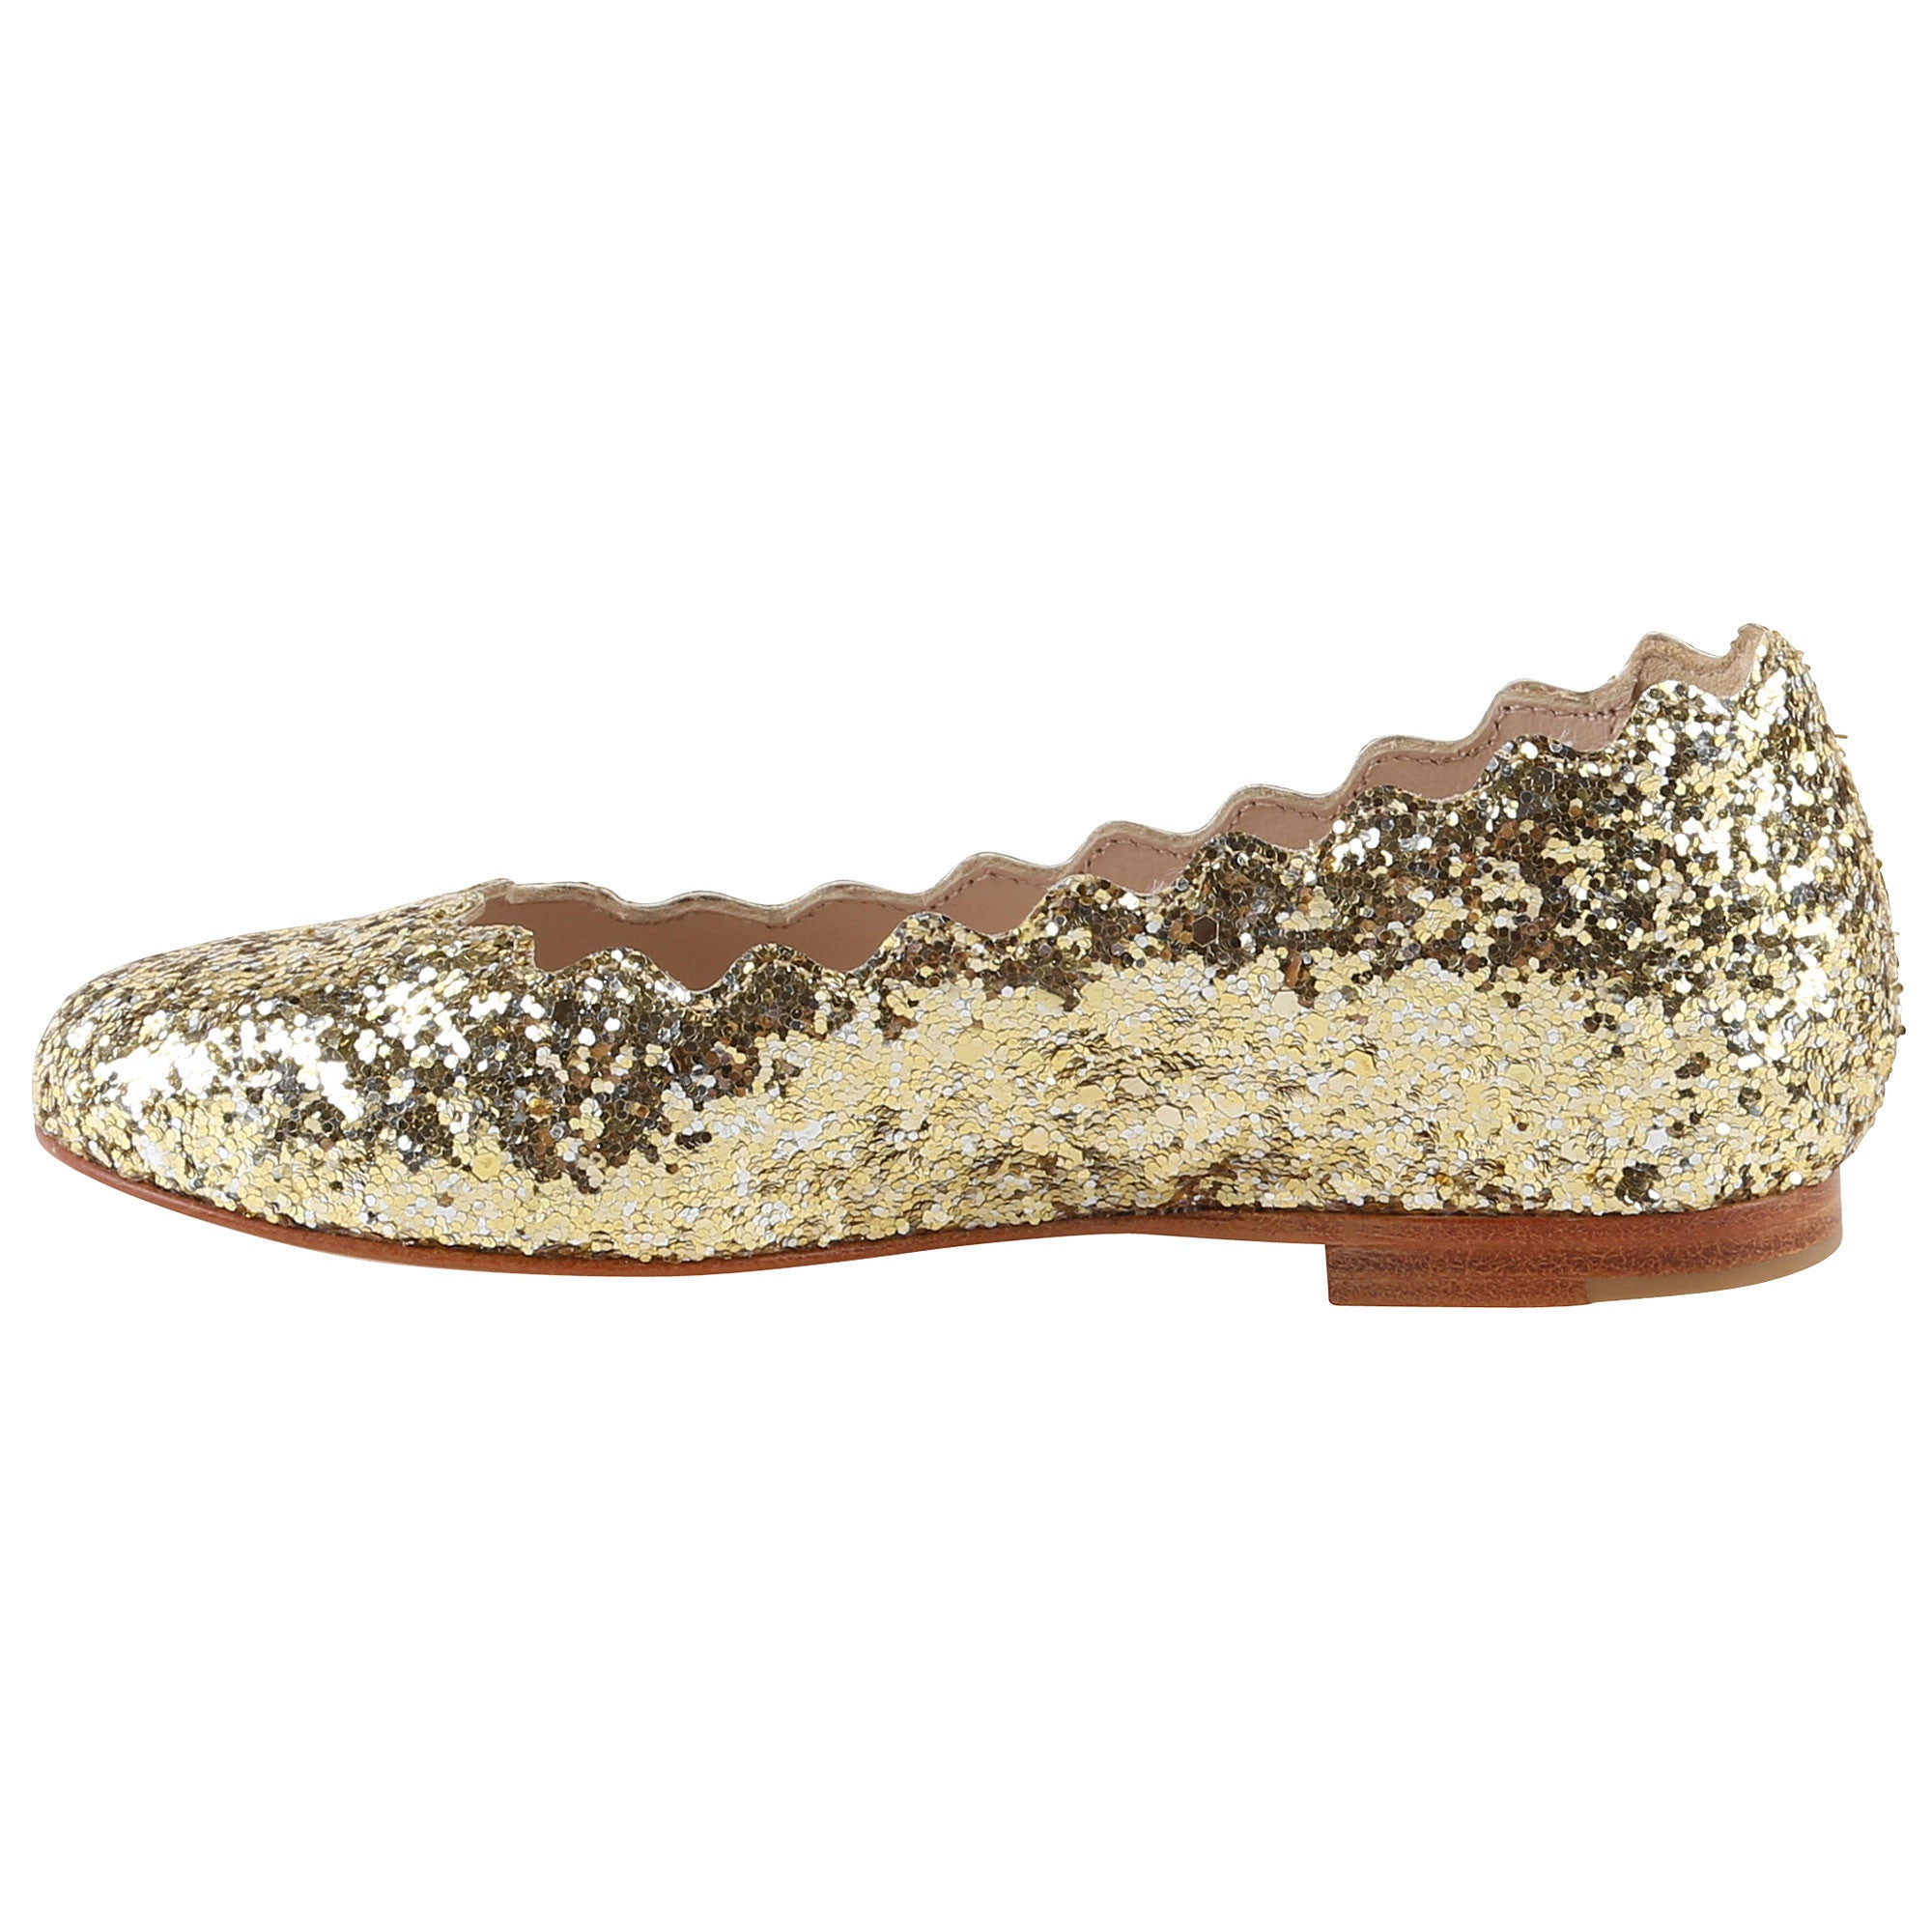 Girls Gold Scalloped Leather Shoes - CÉMAROSE | Children's Fashion Store - 4